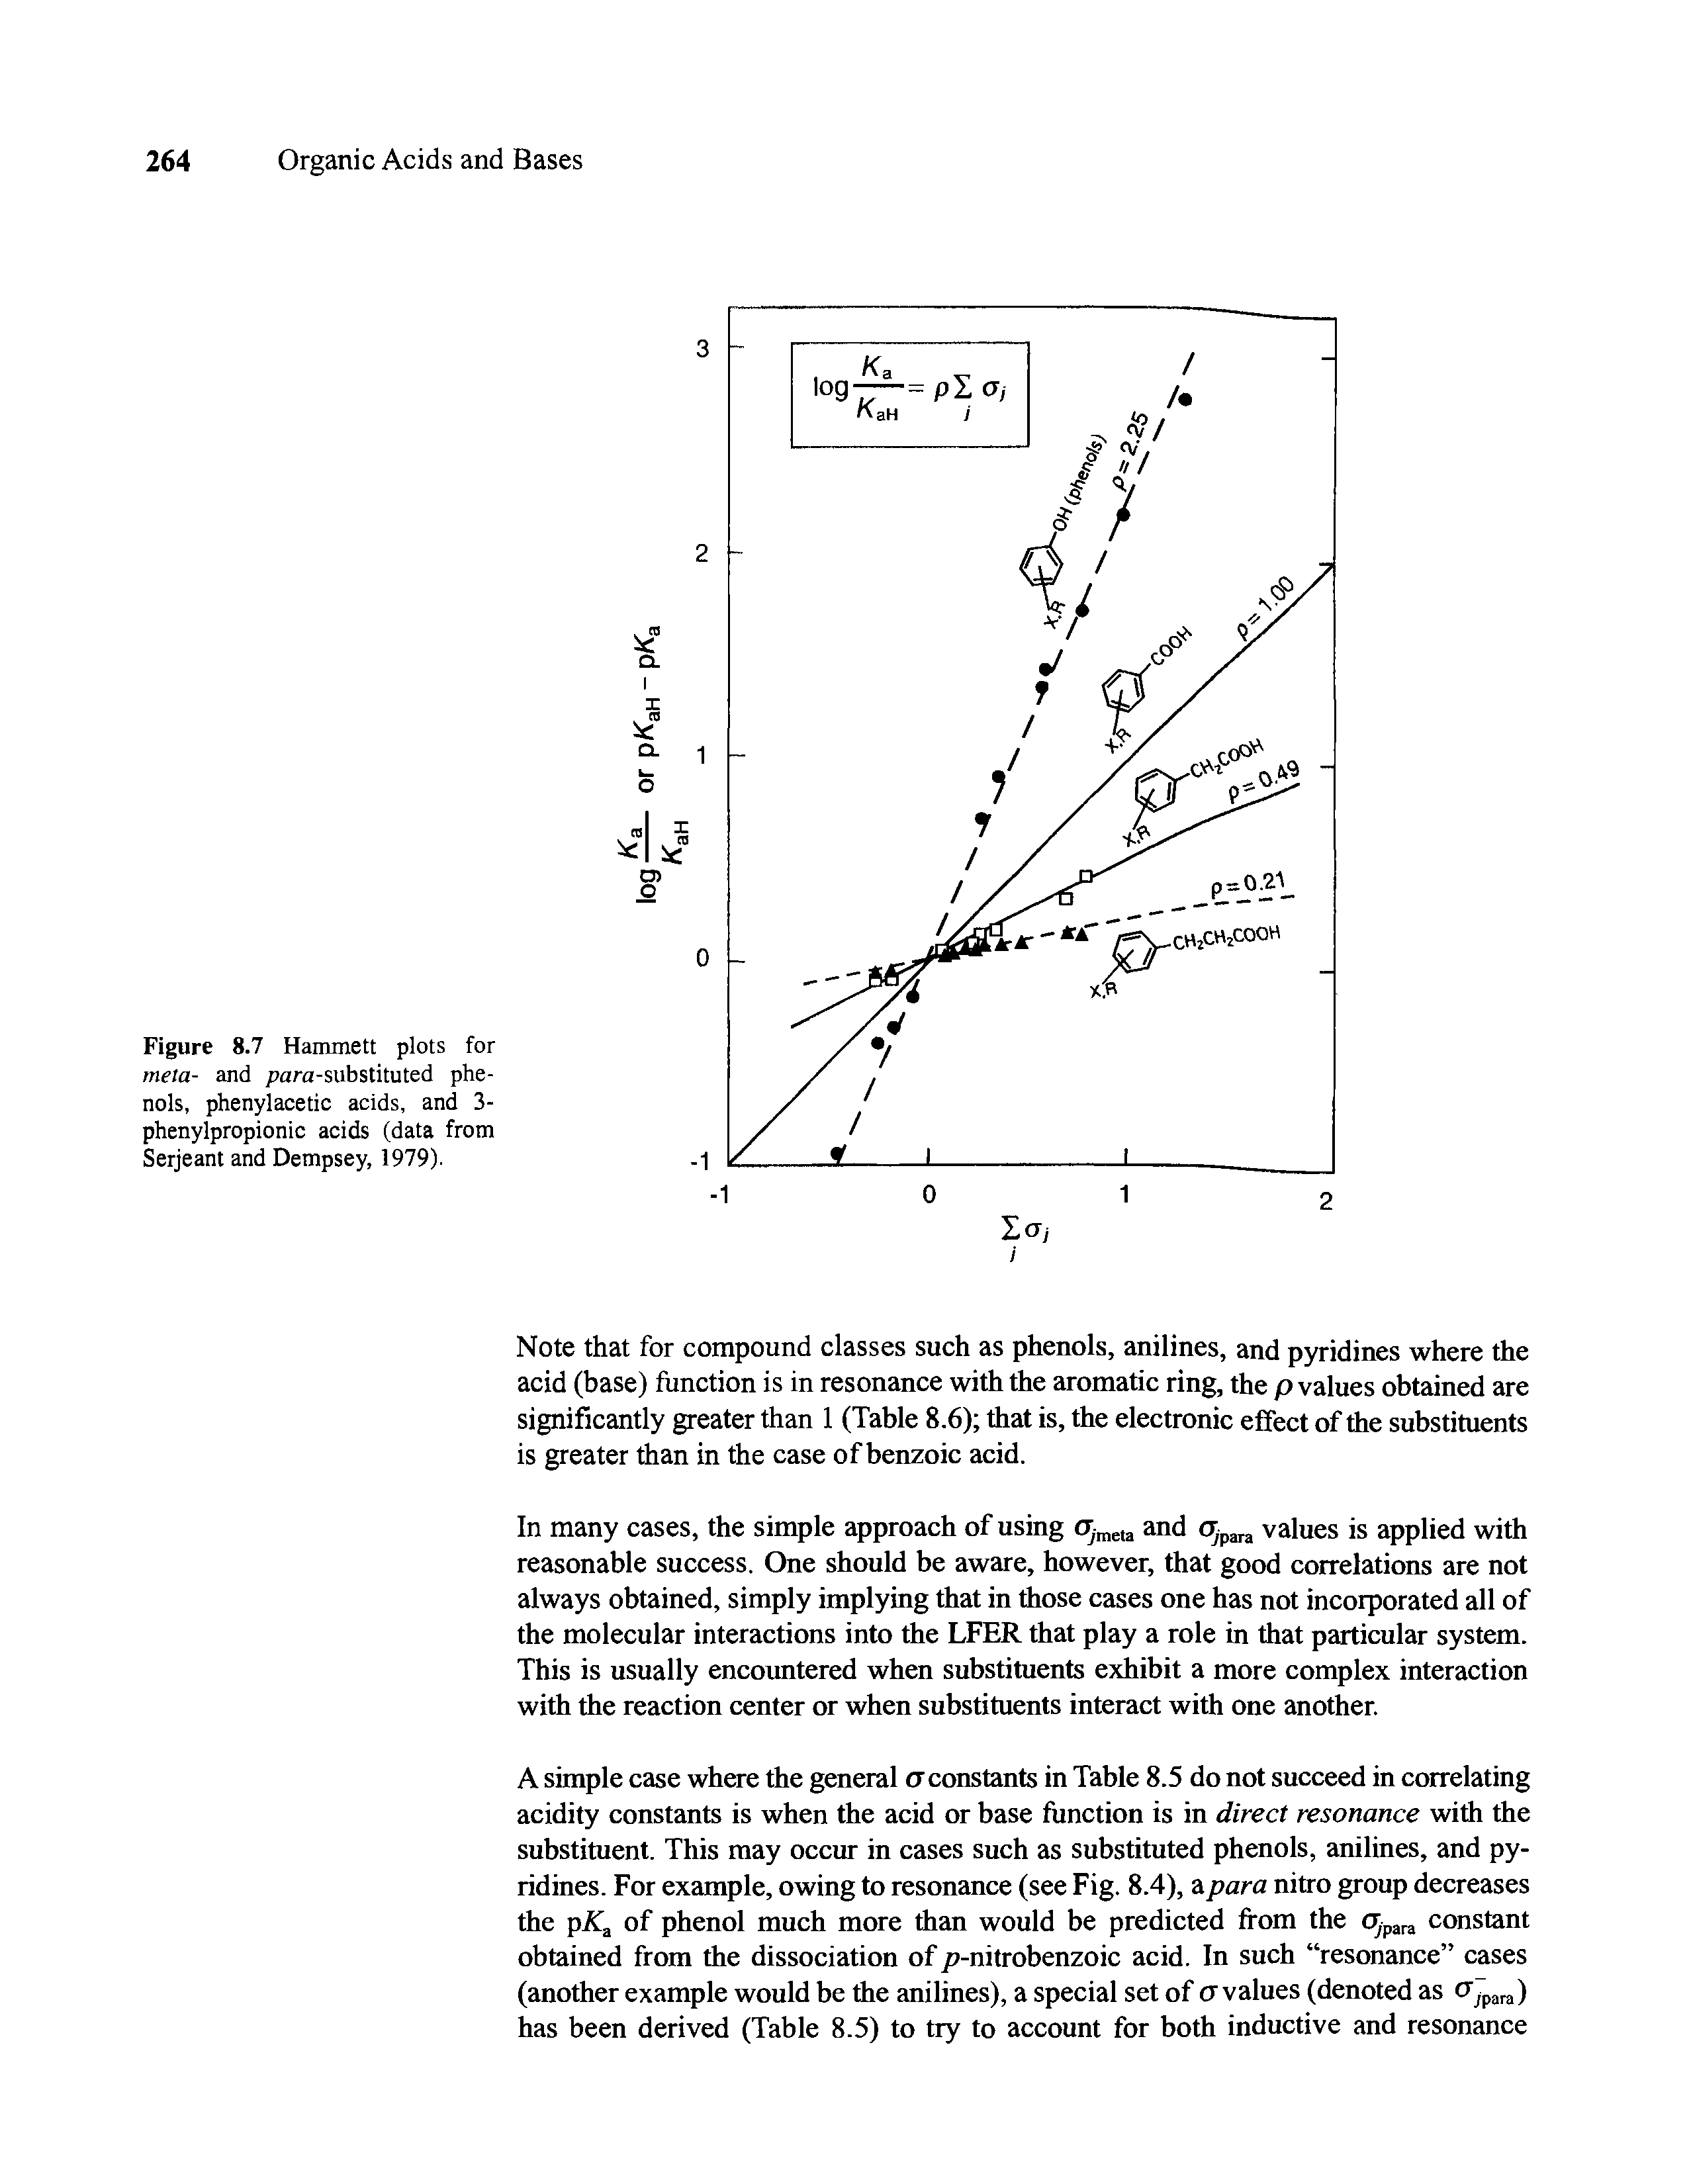 Figure 8.7 Hammett plots for meta- and para-substituted phenols, phenylacetic acids, and 3-phenylpropionic acids (data from Serjeant and Dempsey, 1979).